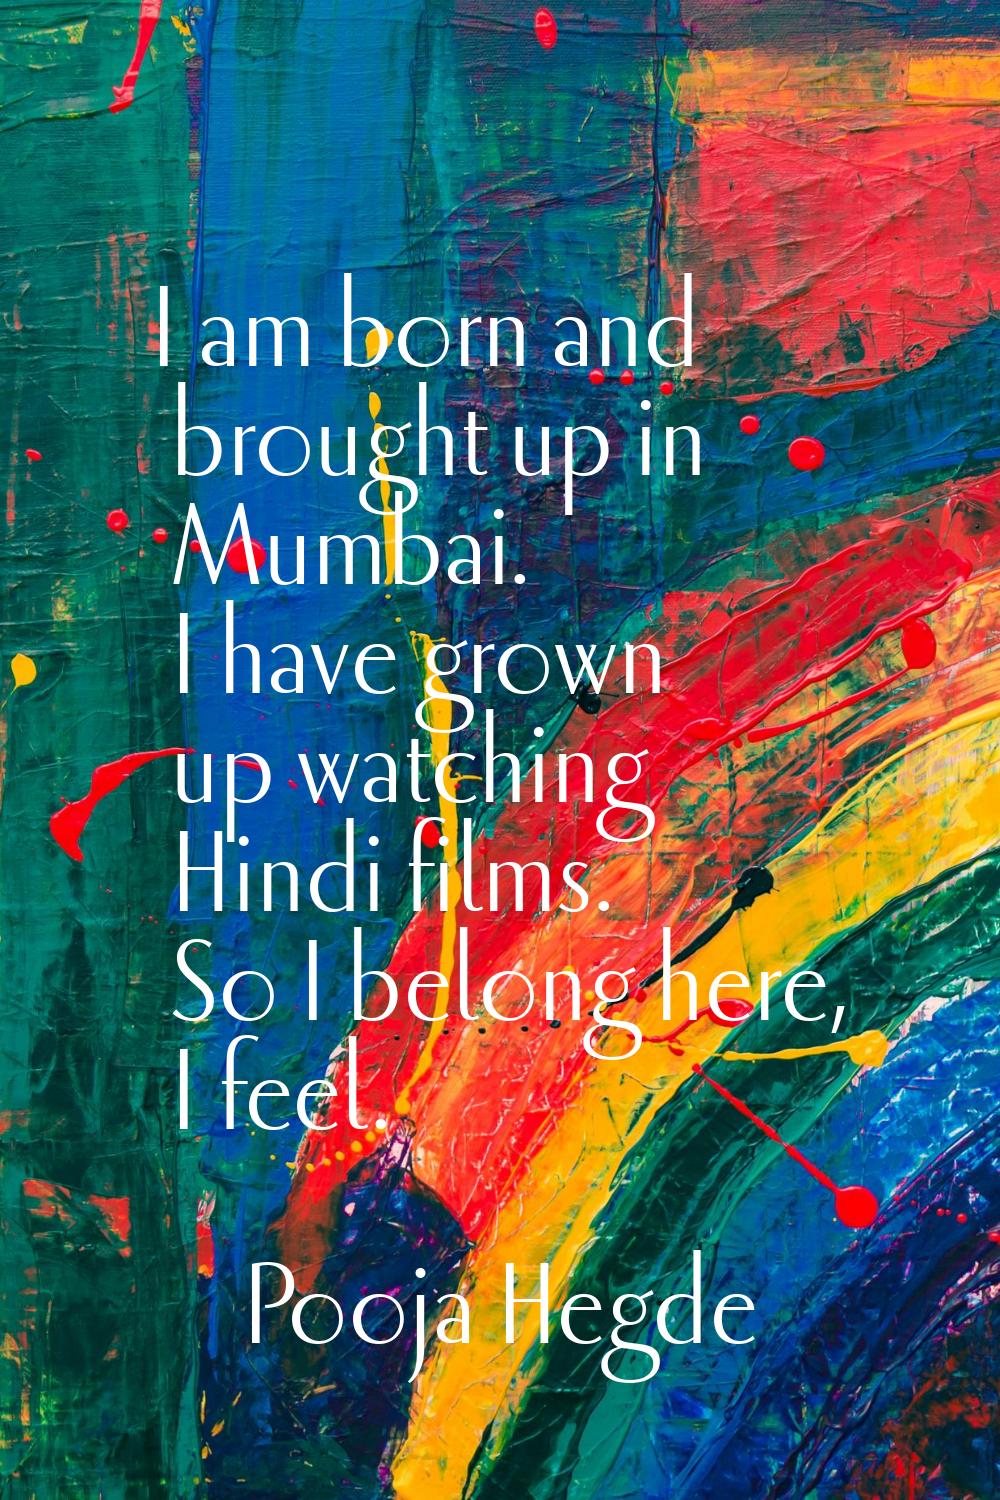 I am born and brought up in Mumbai. I have grown up watching Hindi films. So I belong here, I feel.